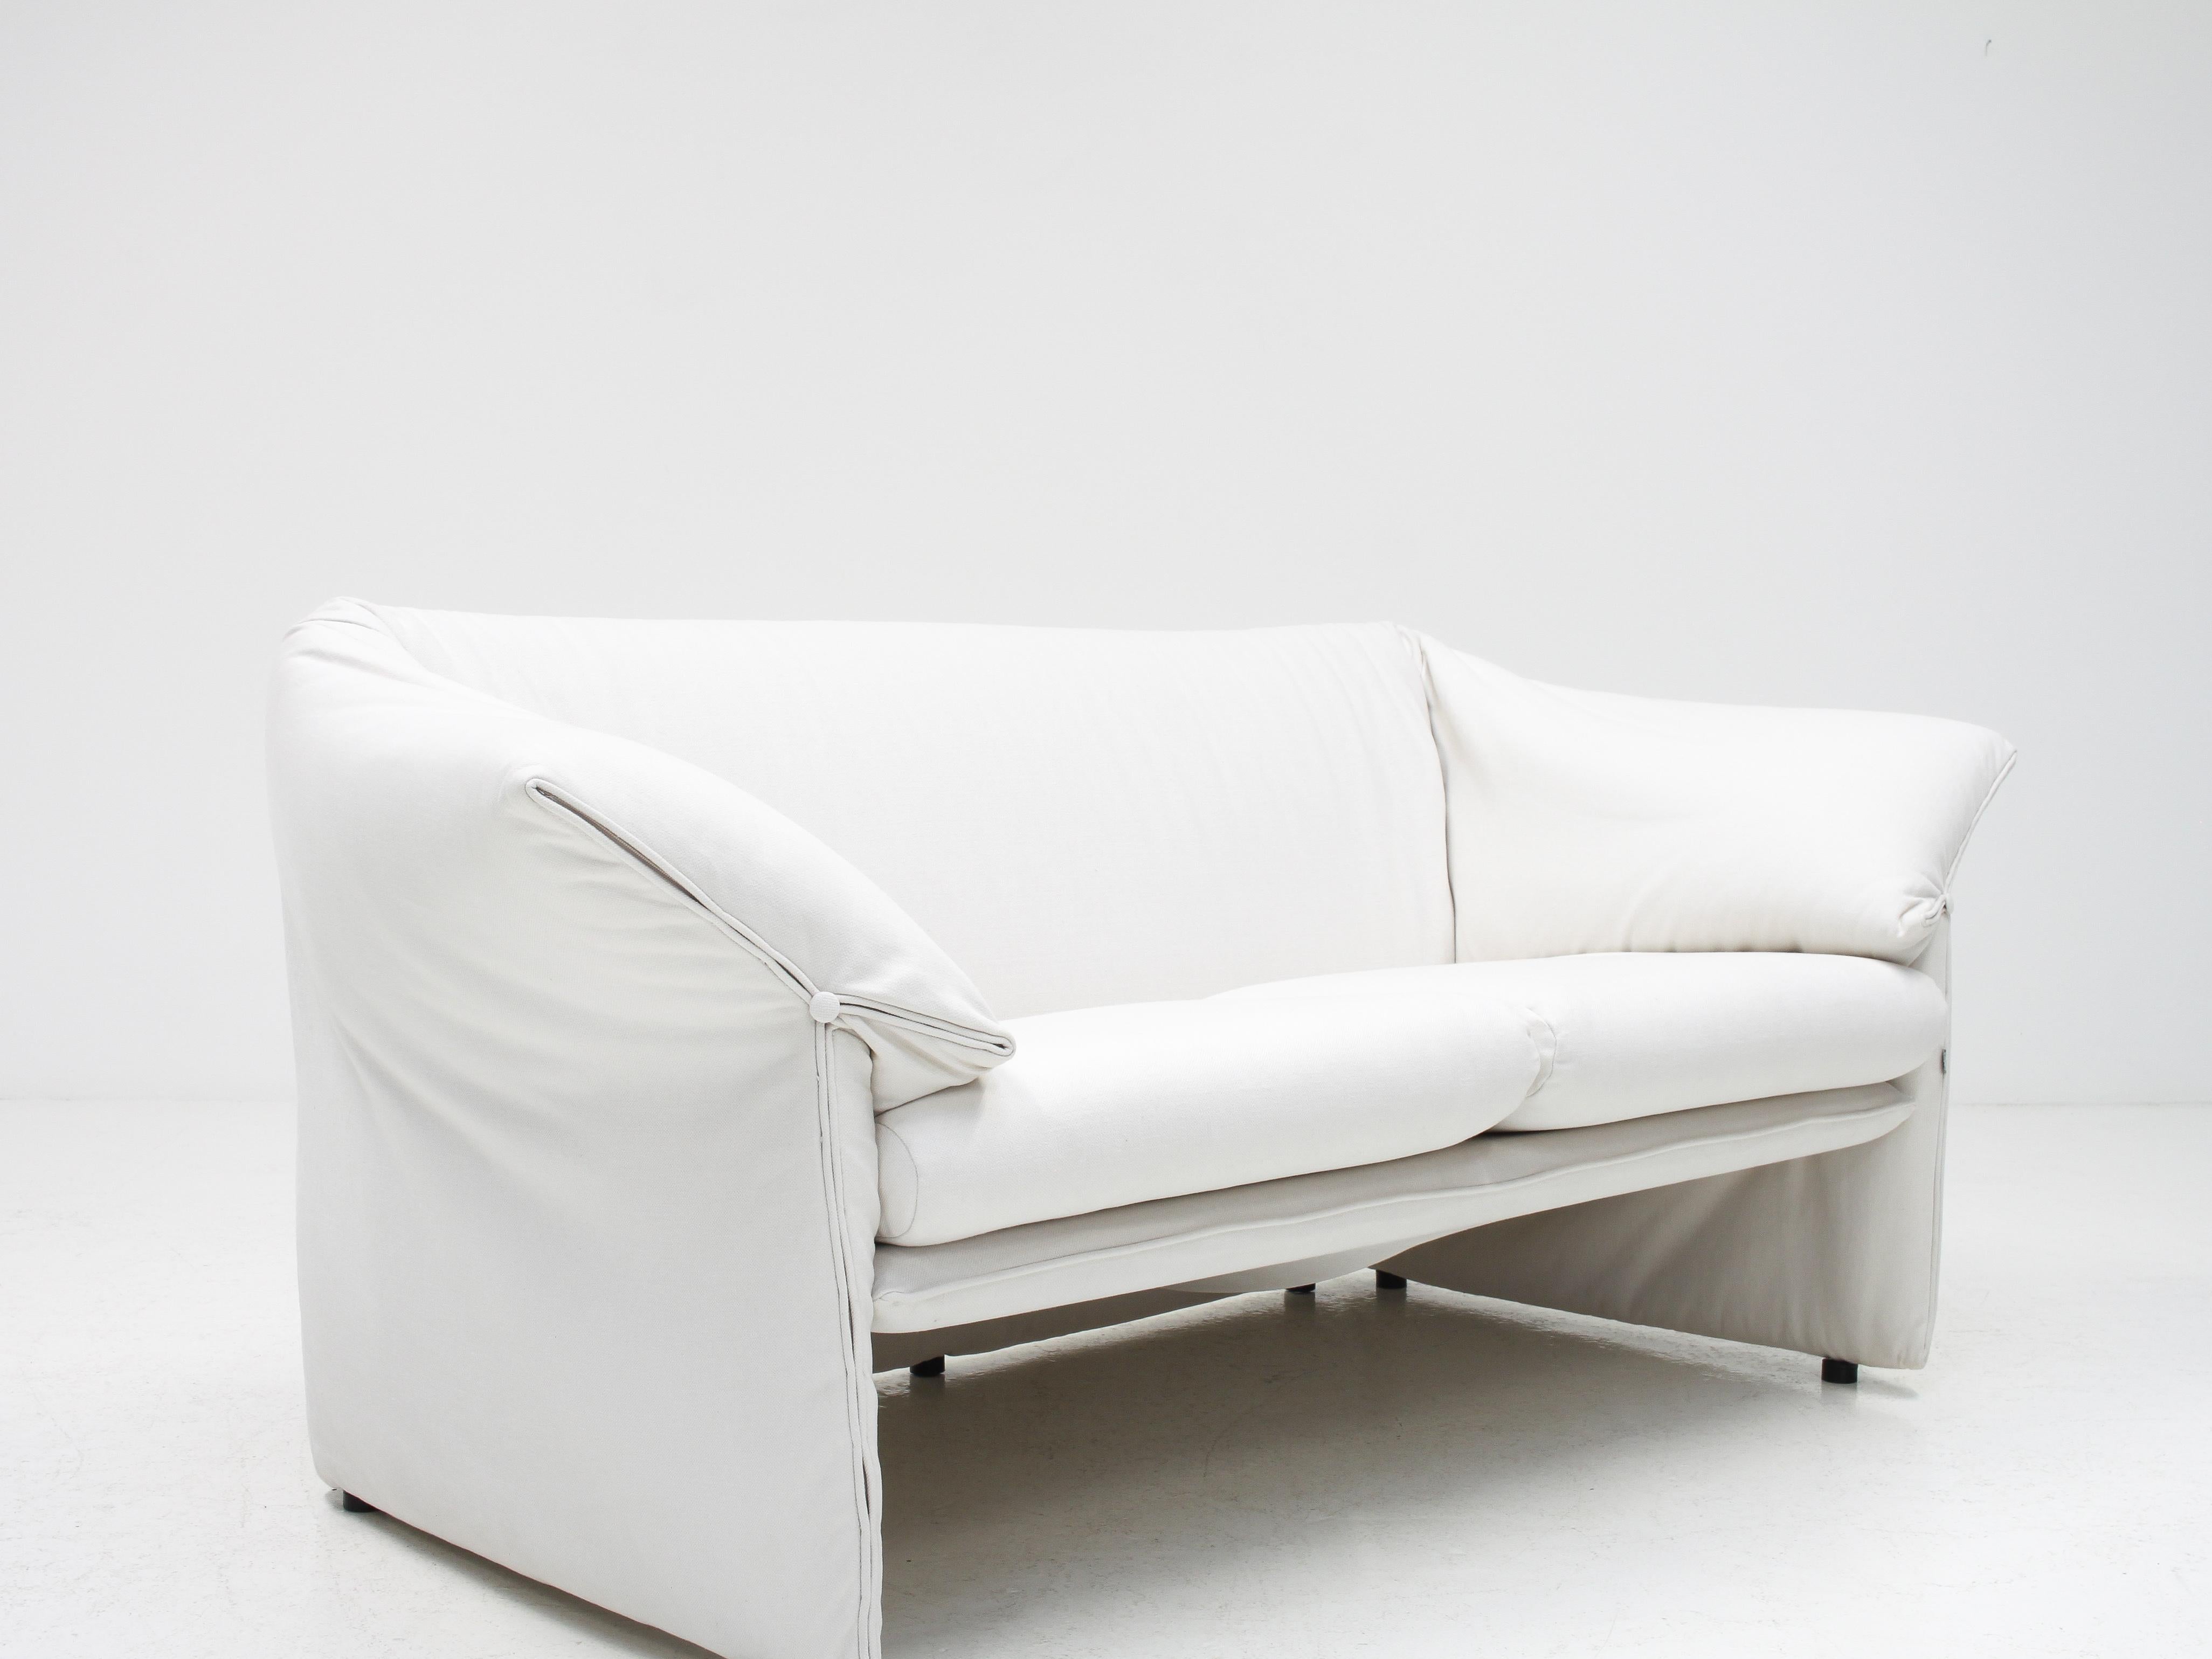  'Le Stelle' Loveseat Sofa by Mario Bellini for B&B Italia, 1974, Reupholstered 11